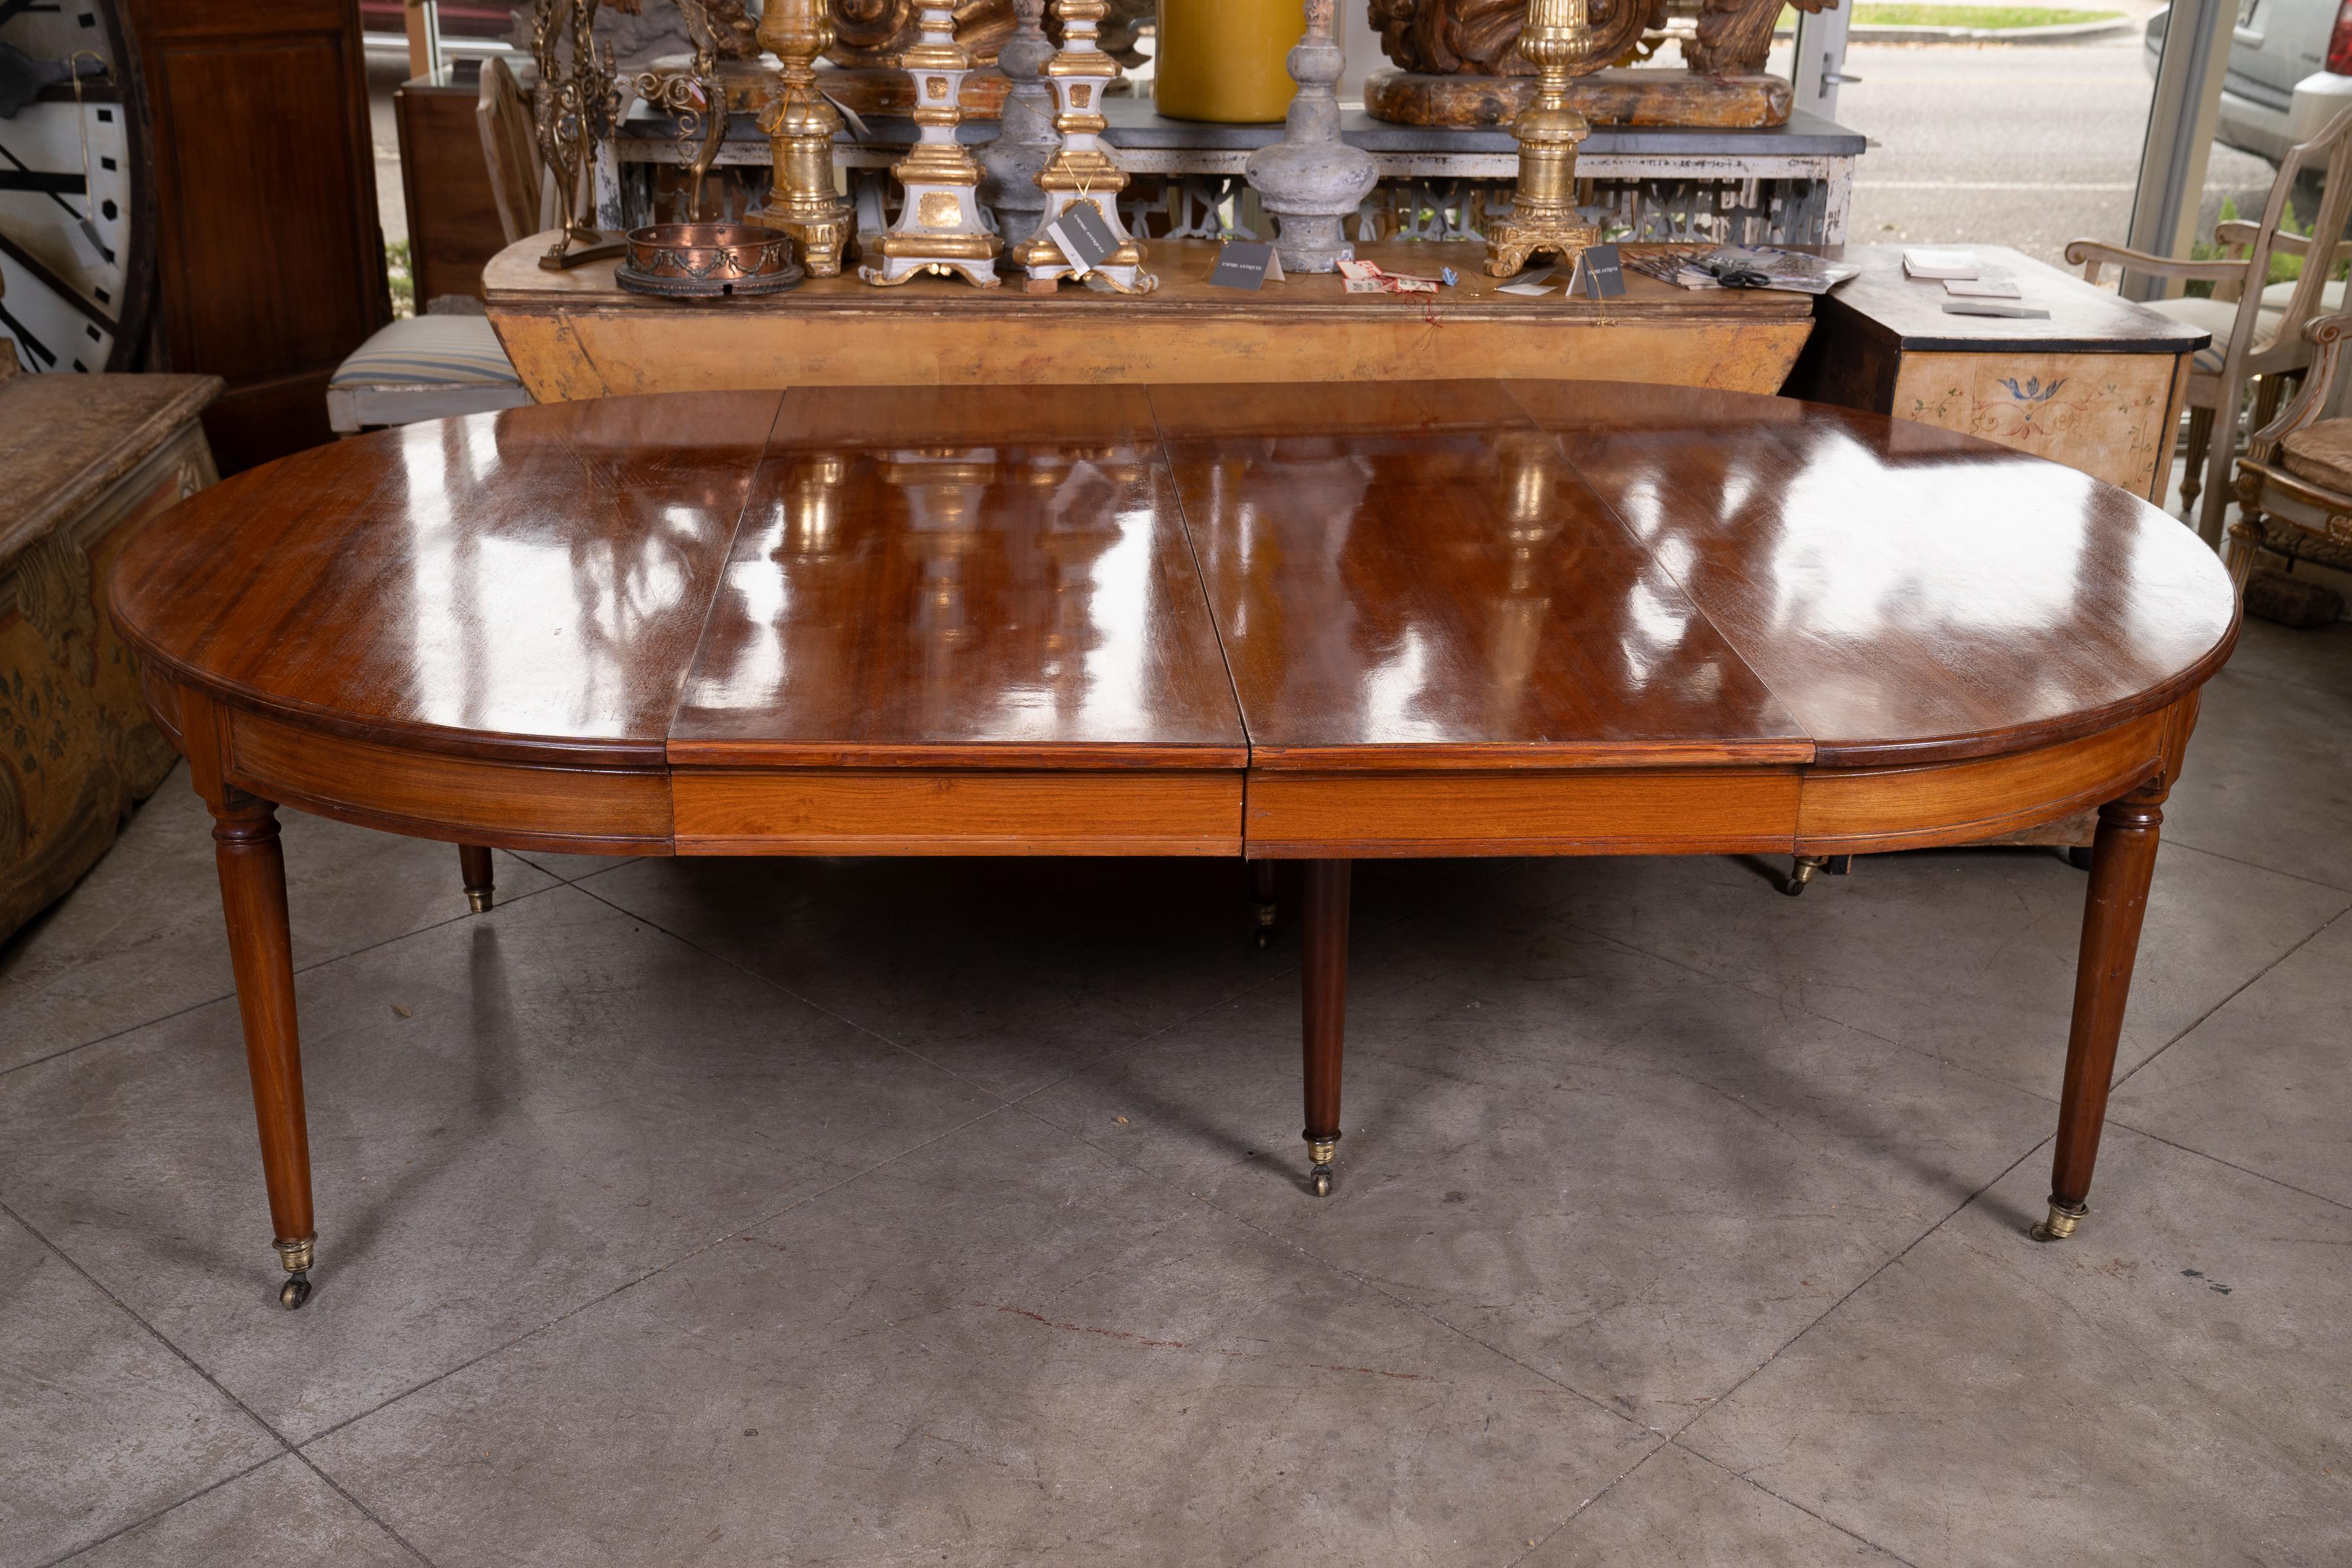 An important and impressive Period Louis XVI Extension Table with 3 finished leaves.The table measures 52”x 57.5 which is a fat oval shape when it is not extended.. Each of the 3 leaves is 19.75 so it is a very versatile table that can be used in